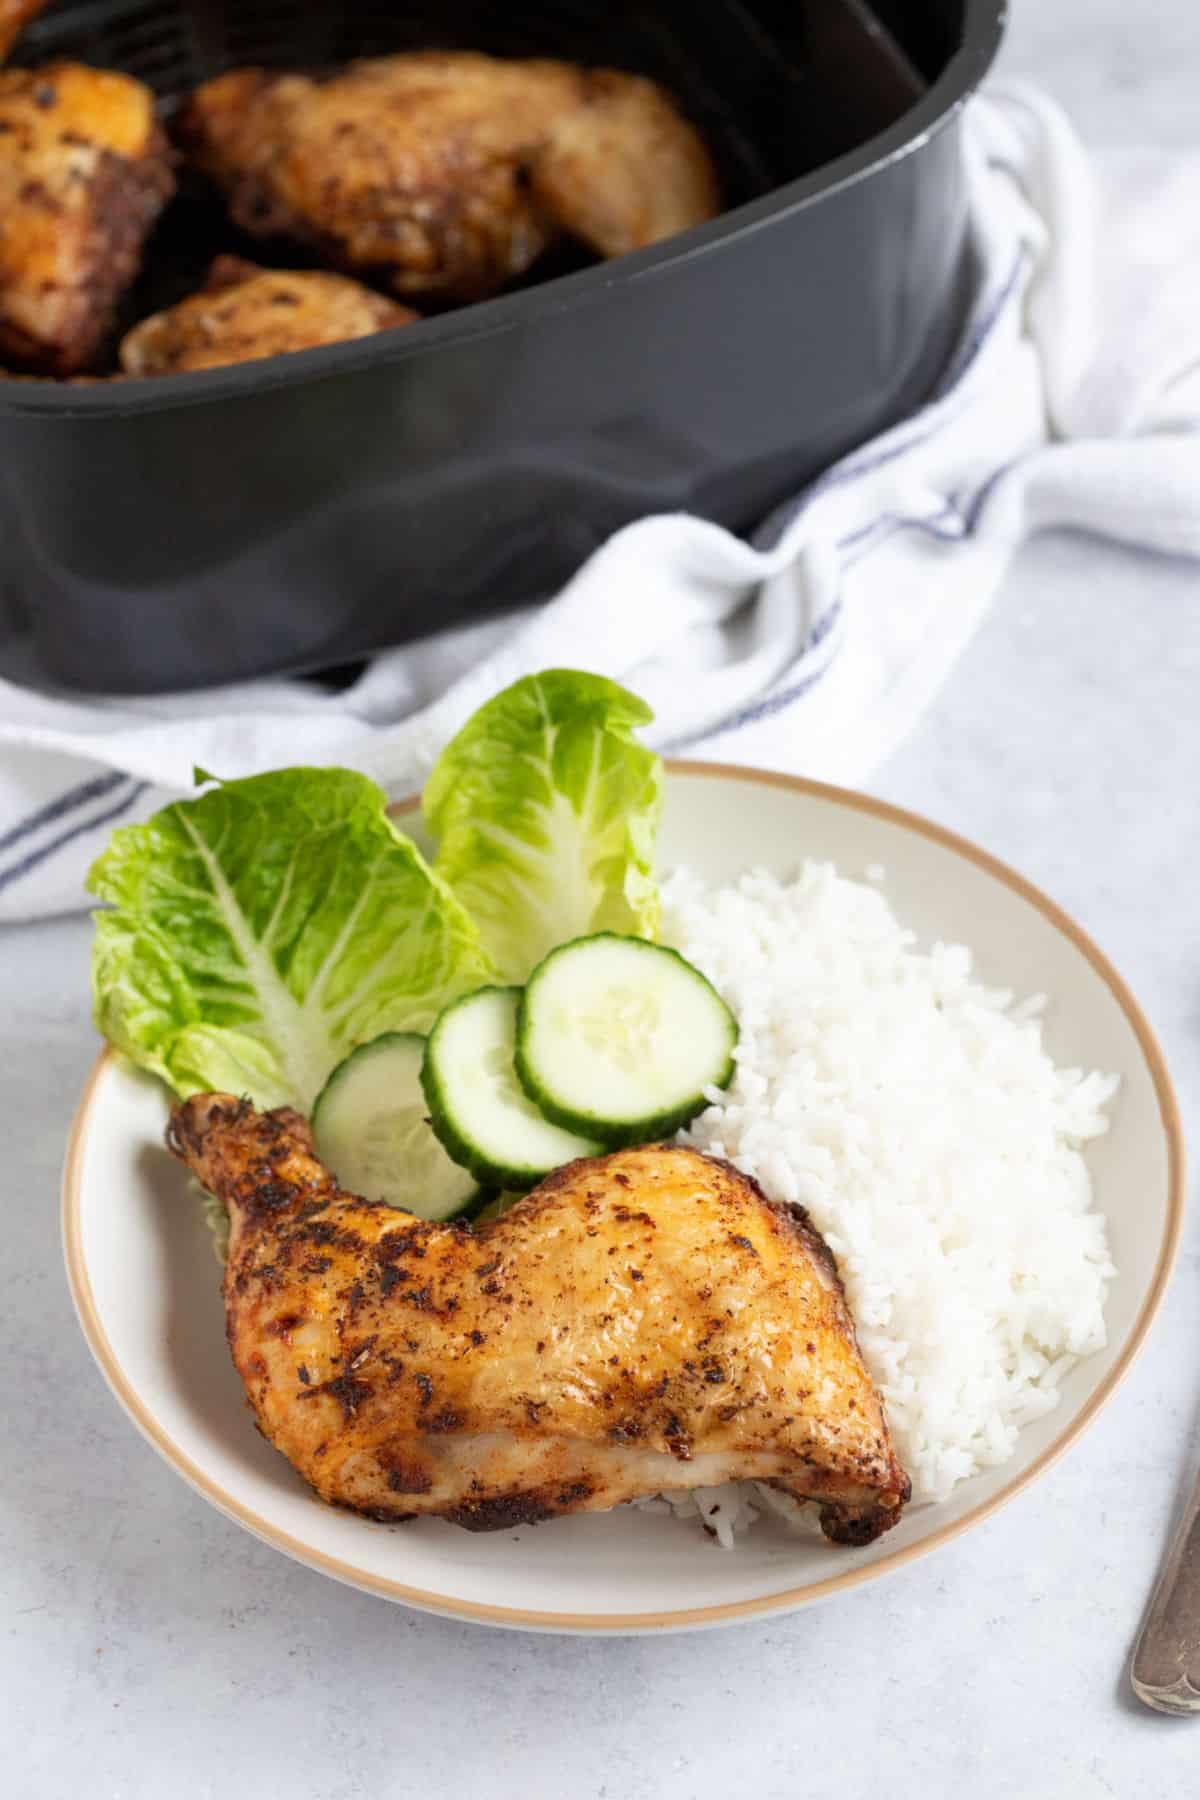 A crispy air fryer chicken leg on a plate with rice and salad.